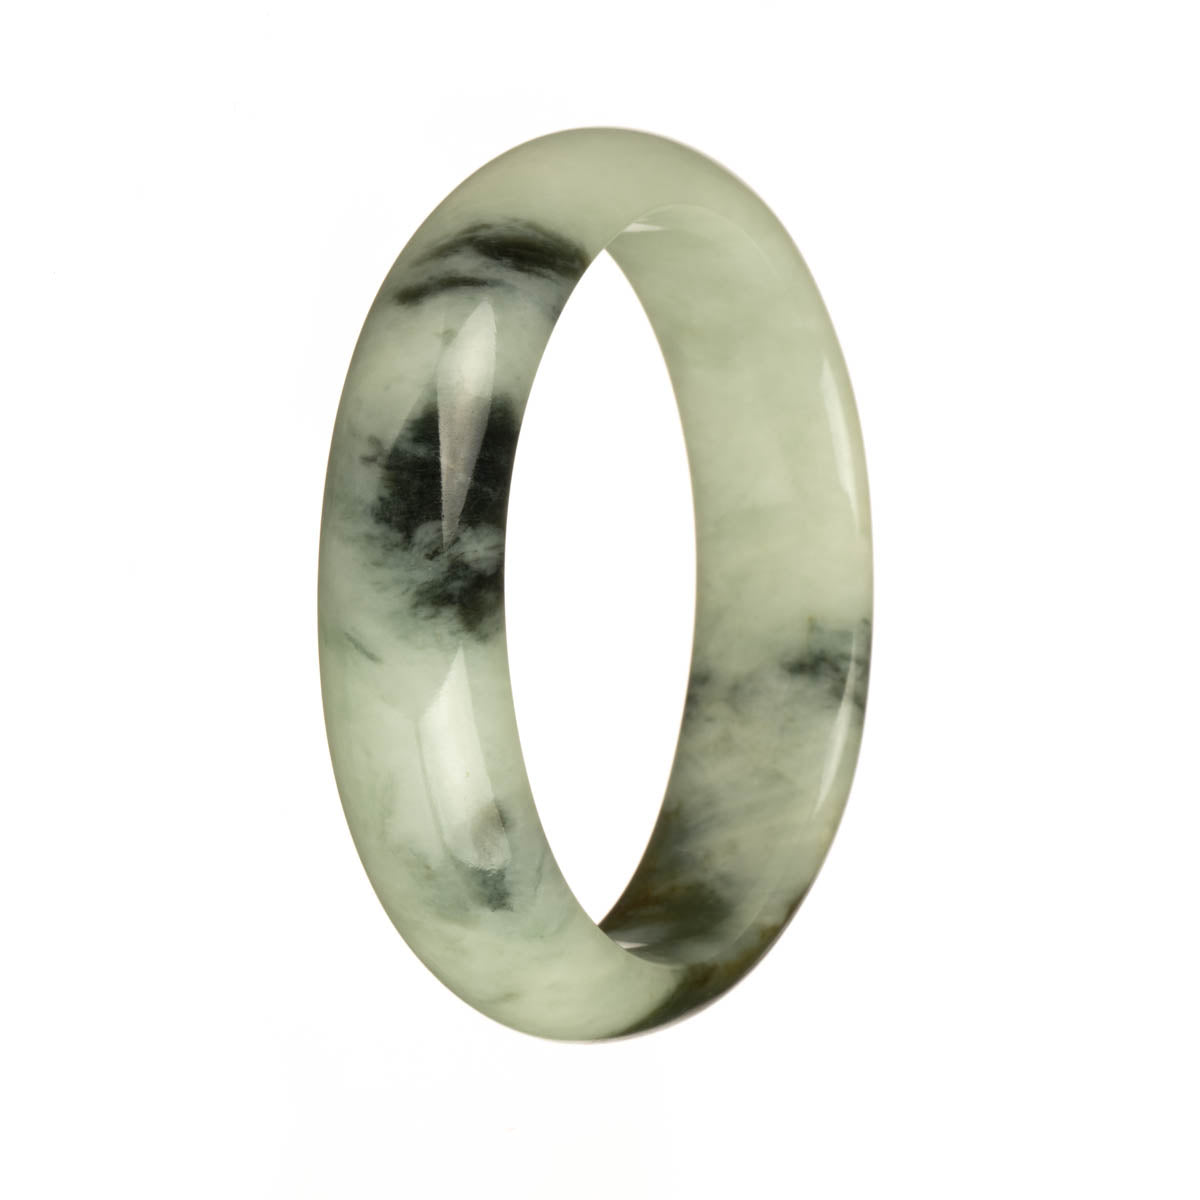 A beautiful pale green jadeite bangle with olive green and deep green patterns, in a 58mm half moon shape.